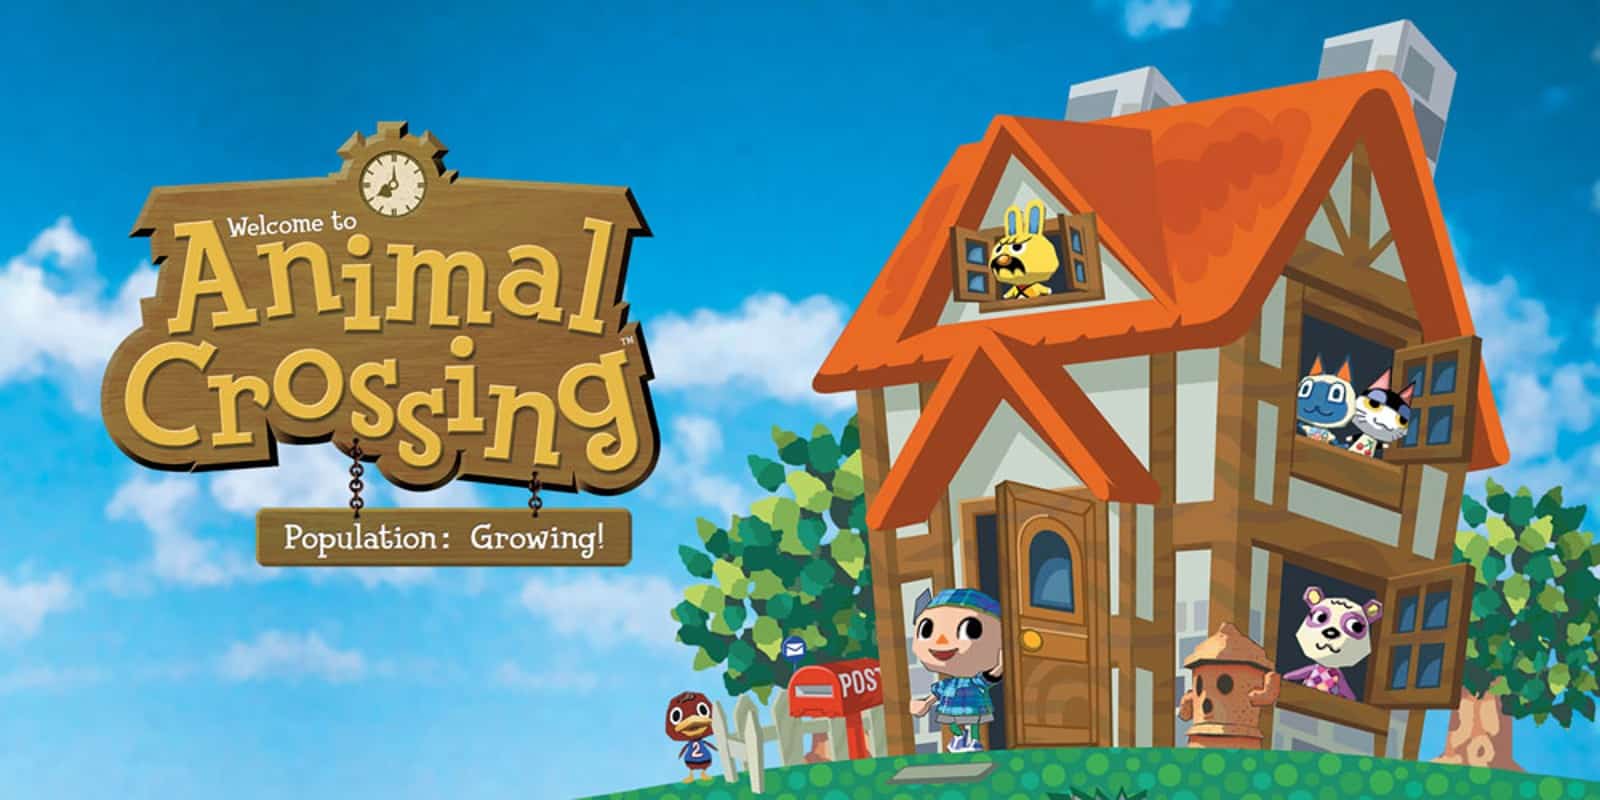 <p>The first actual <em>Animal Crossing</em> titled game debuted on GameCube in 2002 in America, 2003 in Australia, and 2004 in Europe. The game is again a Nintendo EAD-developed title and essentially a more widely available remake of <em>Animal Forest</em>. Interestingly, there are Nintendo game cartridges to collect in this game, along with other findable items like fossils.</p>    <p><em>Animal Crossing</em> improves on <em>Animal Forest</em> in several ways. It adds better graphics and more gameplay elements, making the game more in-depth and enjoyable. The internal clock aspect of the series begins in this game. The clock rolls on and progresses your world whether you play the game or not. When you leave the game for extended periods, there will be consequences.</p>    <p>Your goal is to help Tom Nook expand his store by gathering items, running errands, and selling items. Doing these things will help you to pay off your debt from your new house. While you complete these tasks, you'll meet everyone in town and add to the game's social aspect. This game doesn't exactly have a multiplayer system yet, though. You get to interact with other players you create via letters and selling items or visit someone else's town who owns and plays the game if you have another memory card to physically do so.</p><p>Want to see more content like this on your Microsoft Start page?</p> <p>Simply click “Follow” near the headline of this article.</p> <p>After that, be sure to let us know what you think about this content in the comments!</p>